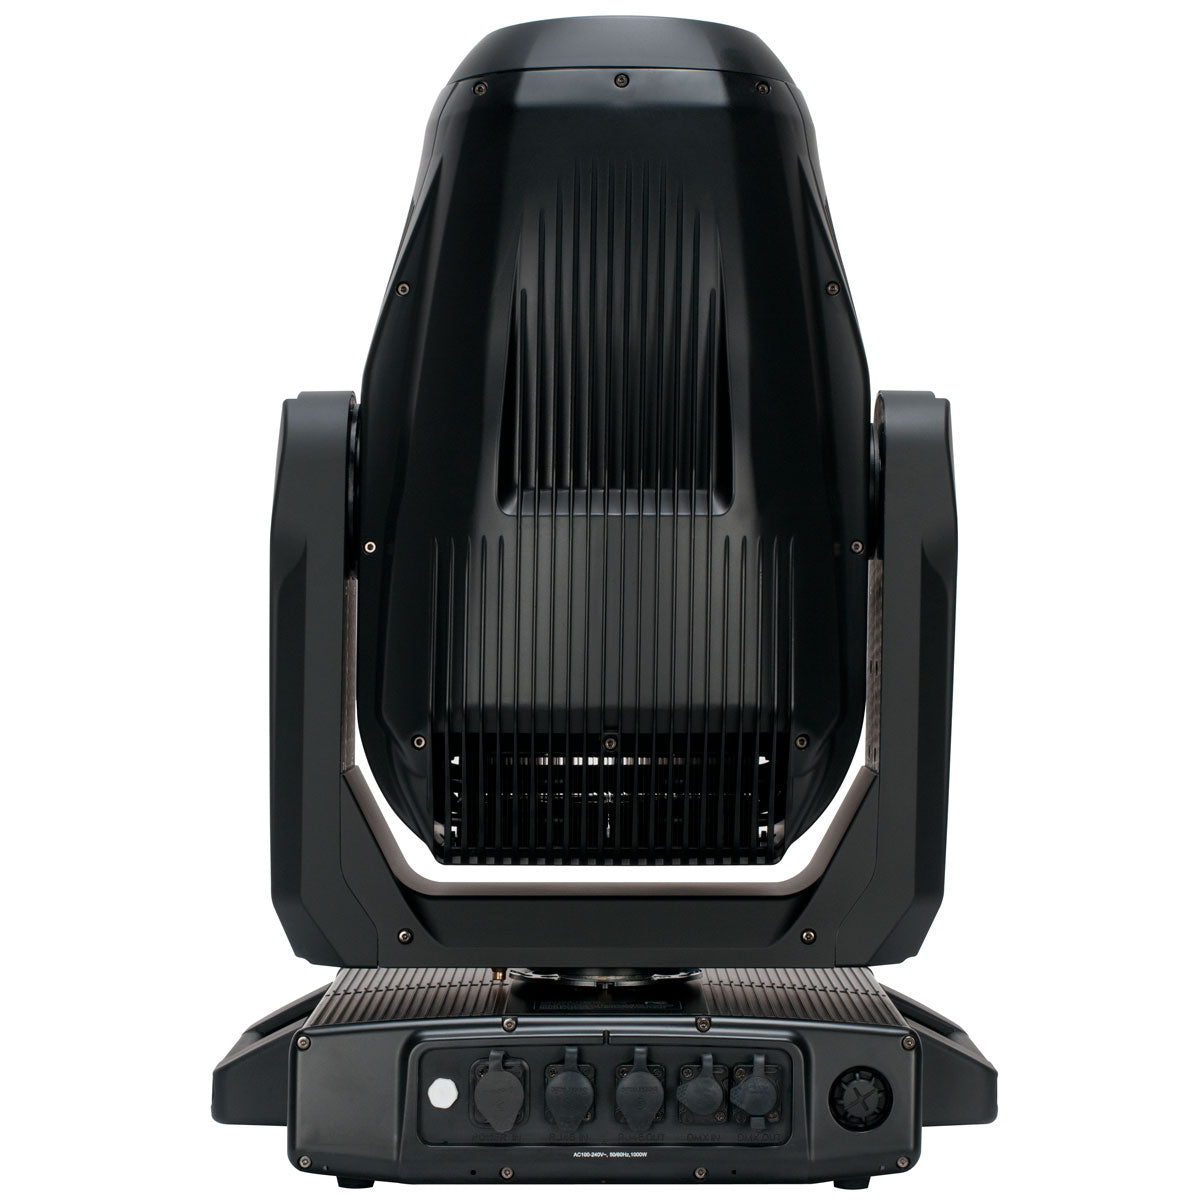 Elation Proteus Lucius - 580W LED CMY Profile IP65 + Framing Fixture, rear up